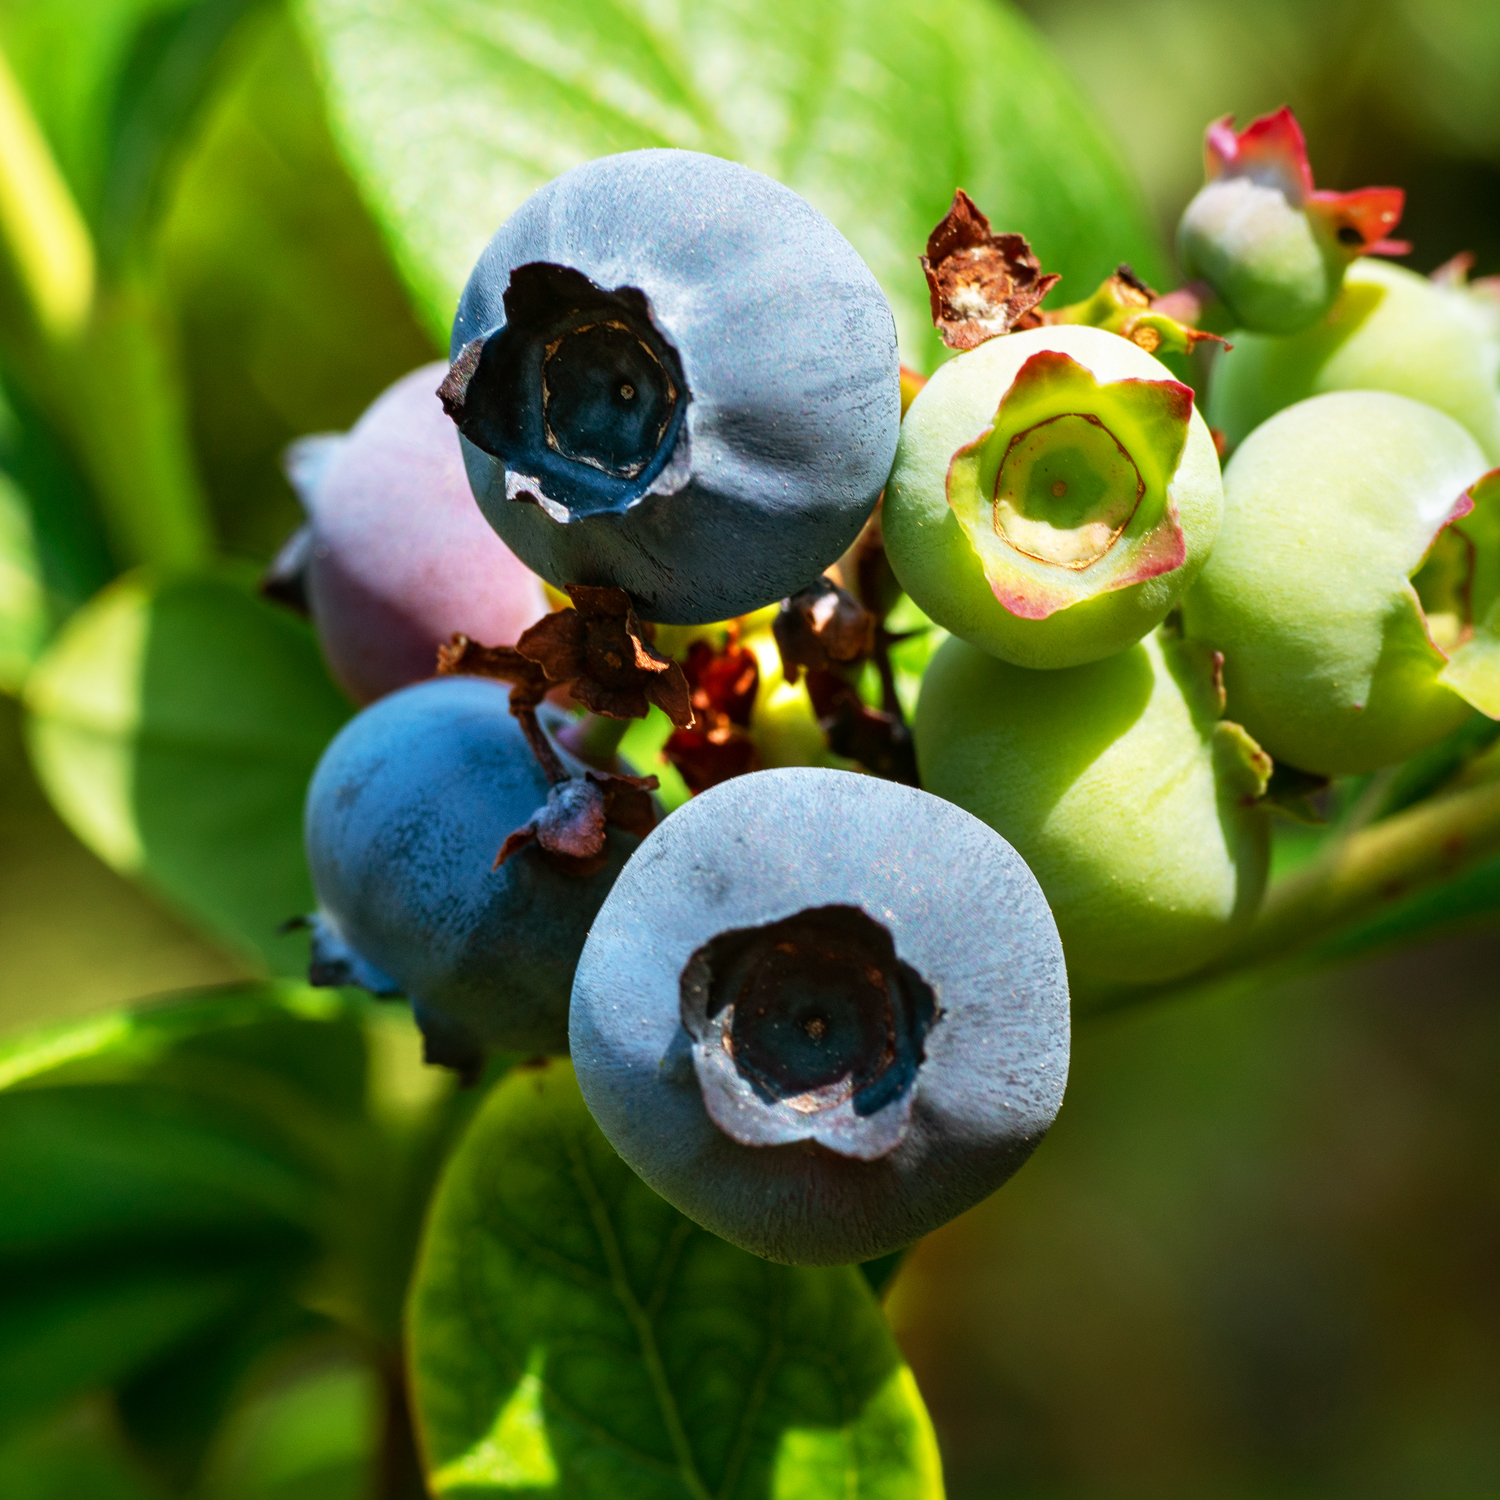 Image of Blueberry bush with ripe and unripe blueberries